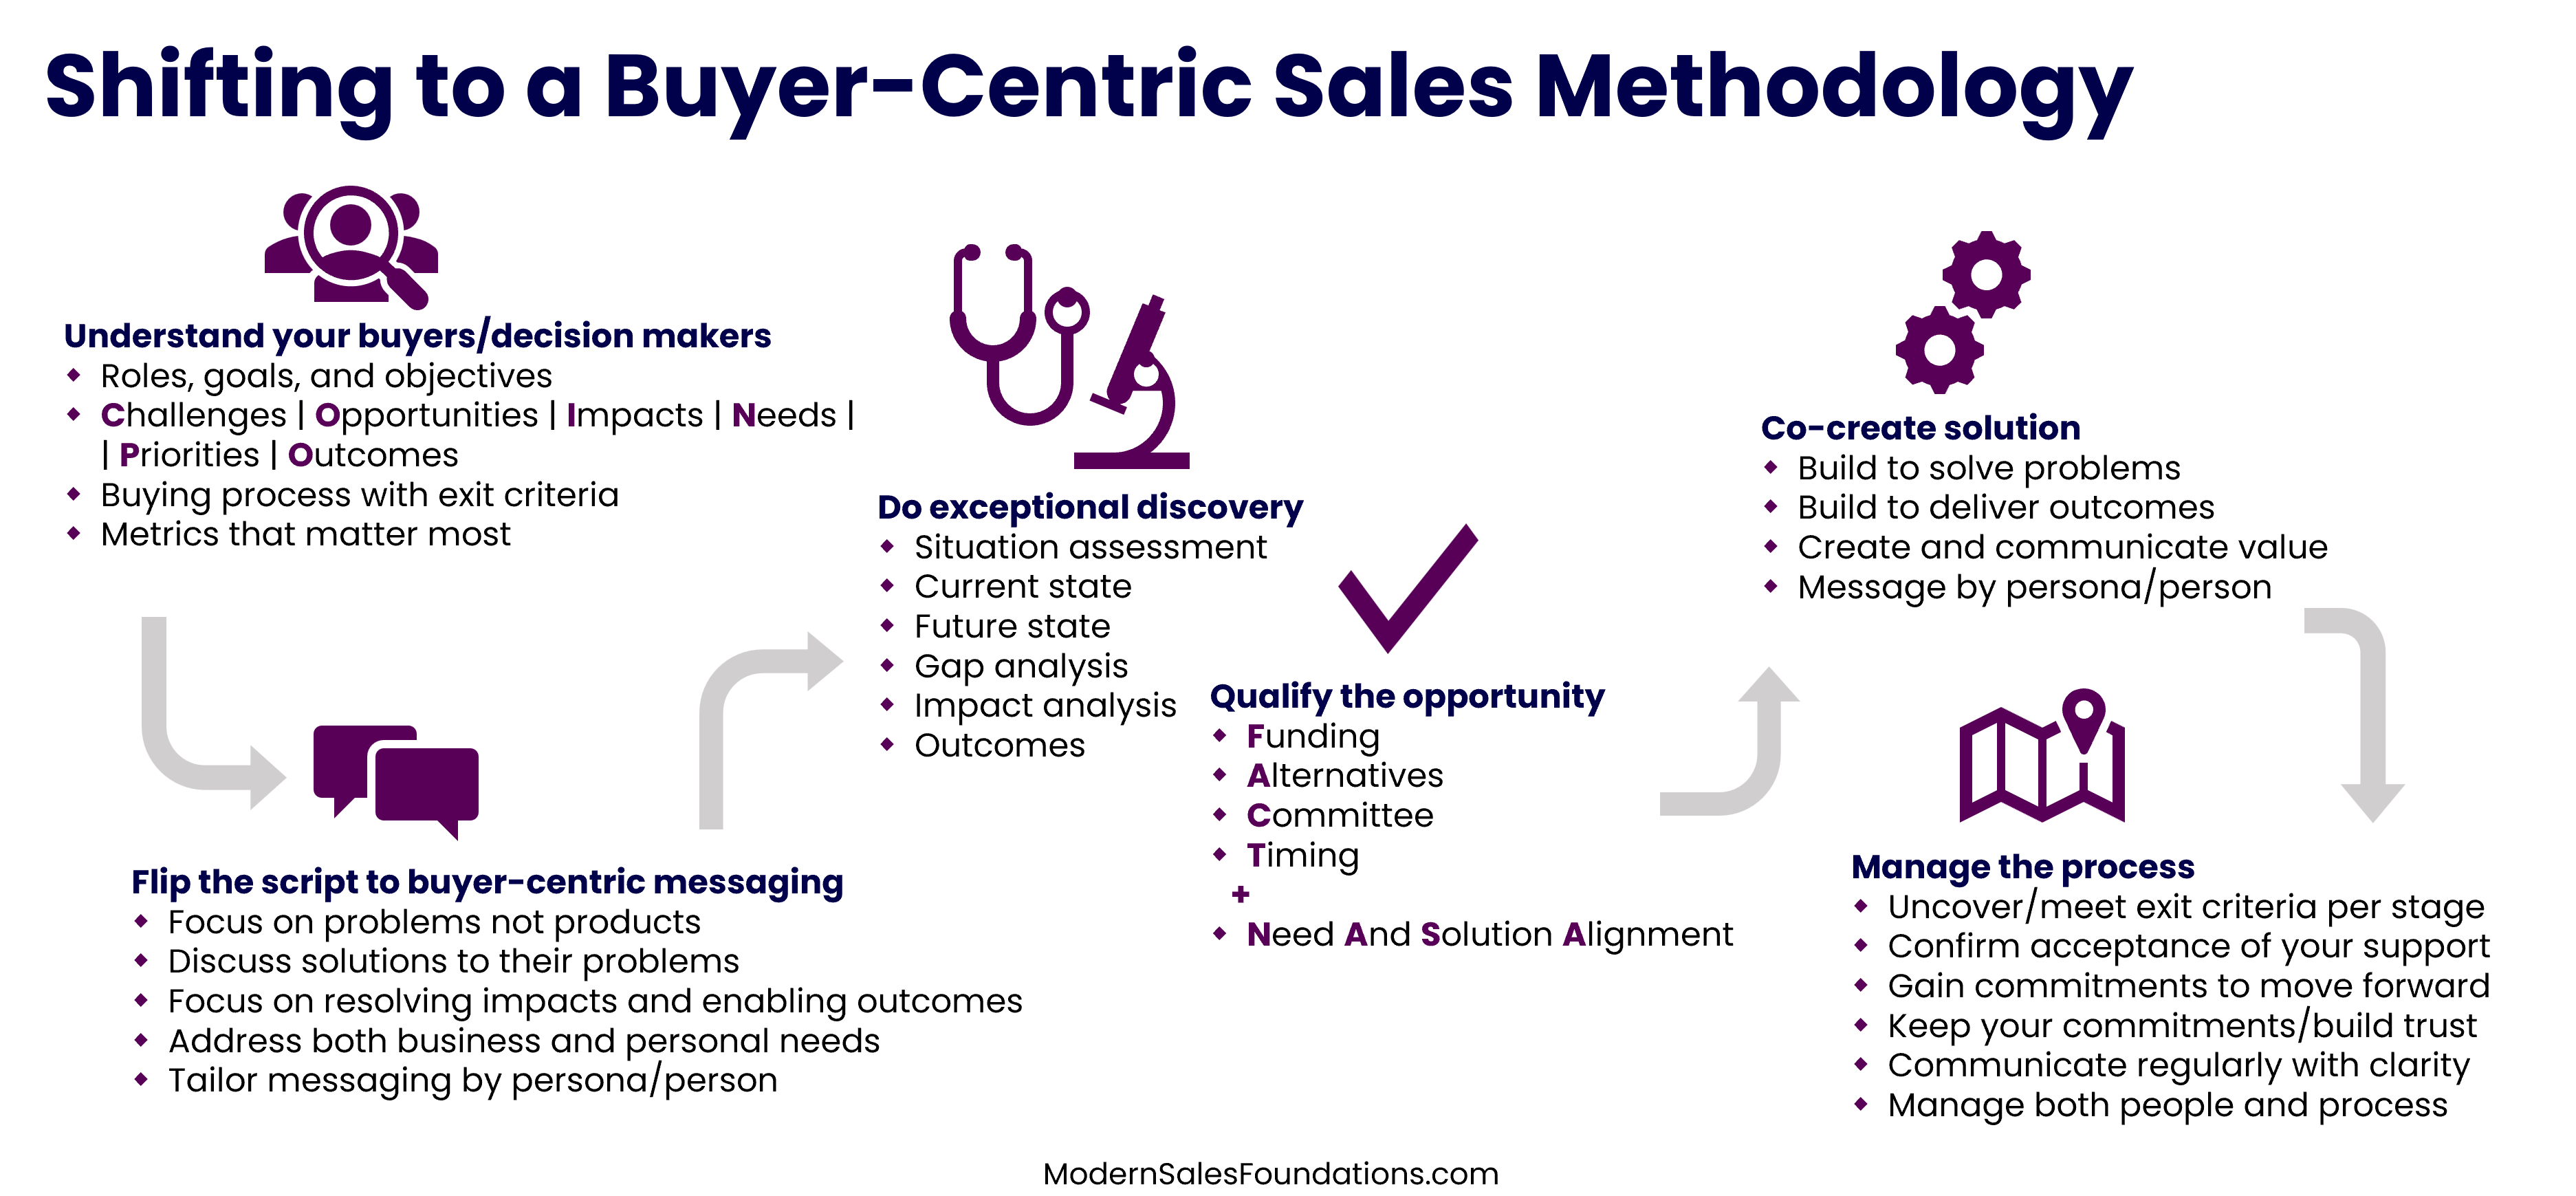 Shifting-to-a-Buyer-Centric-Sales-Methodology